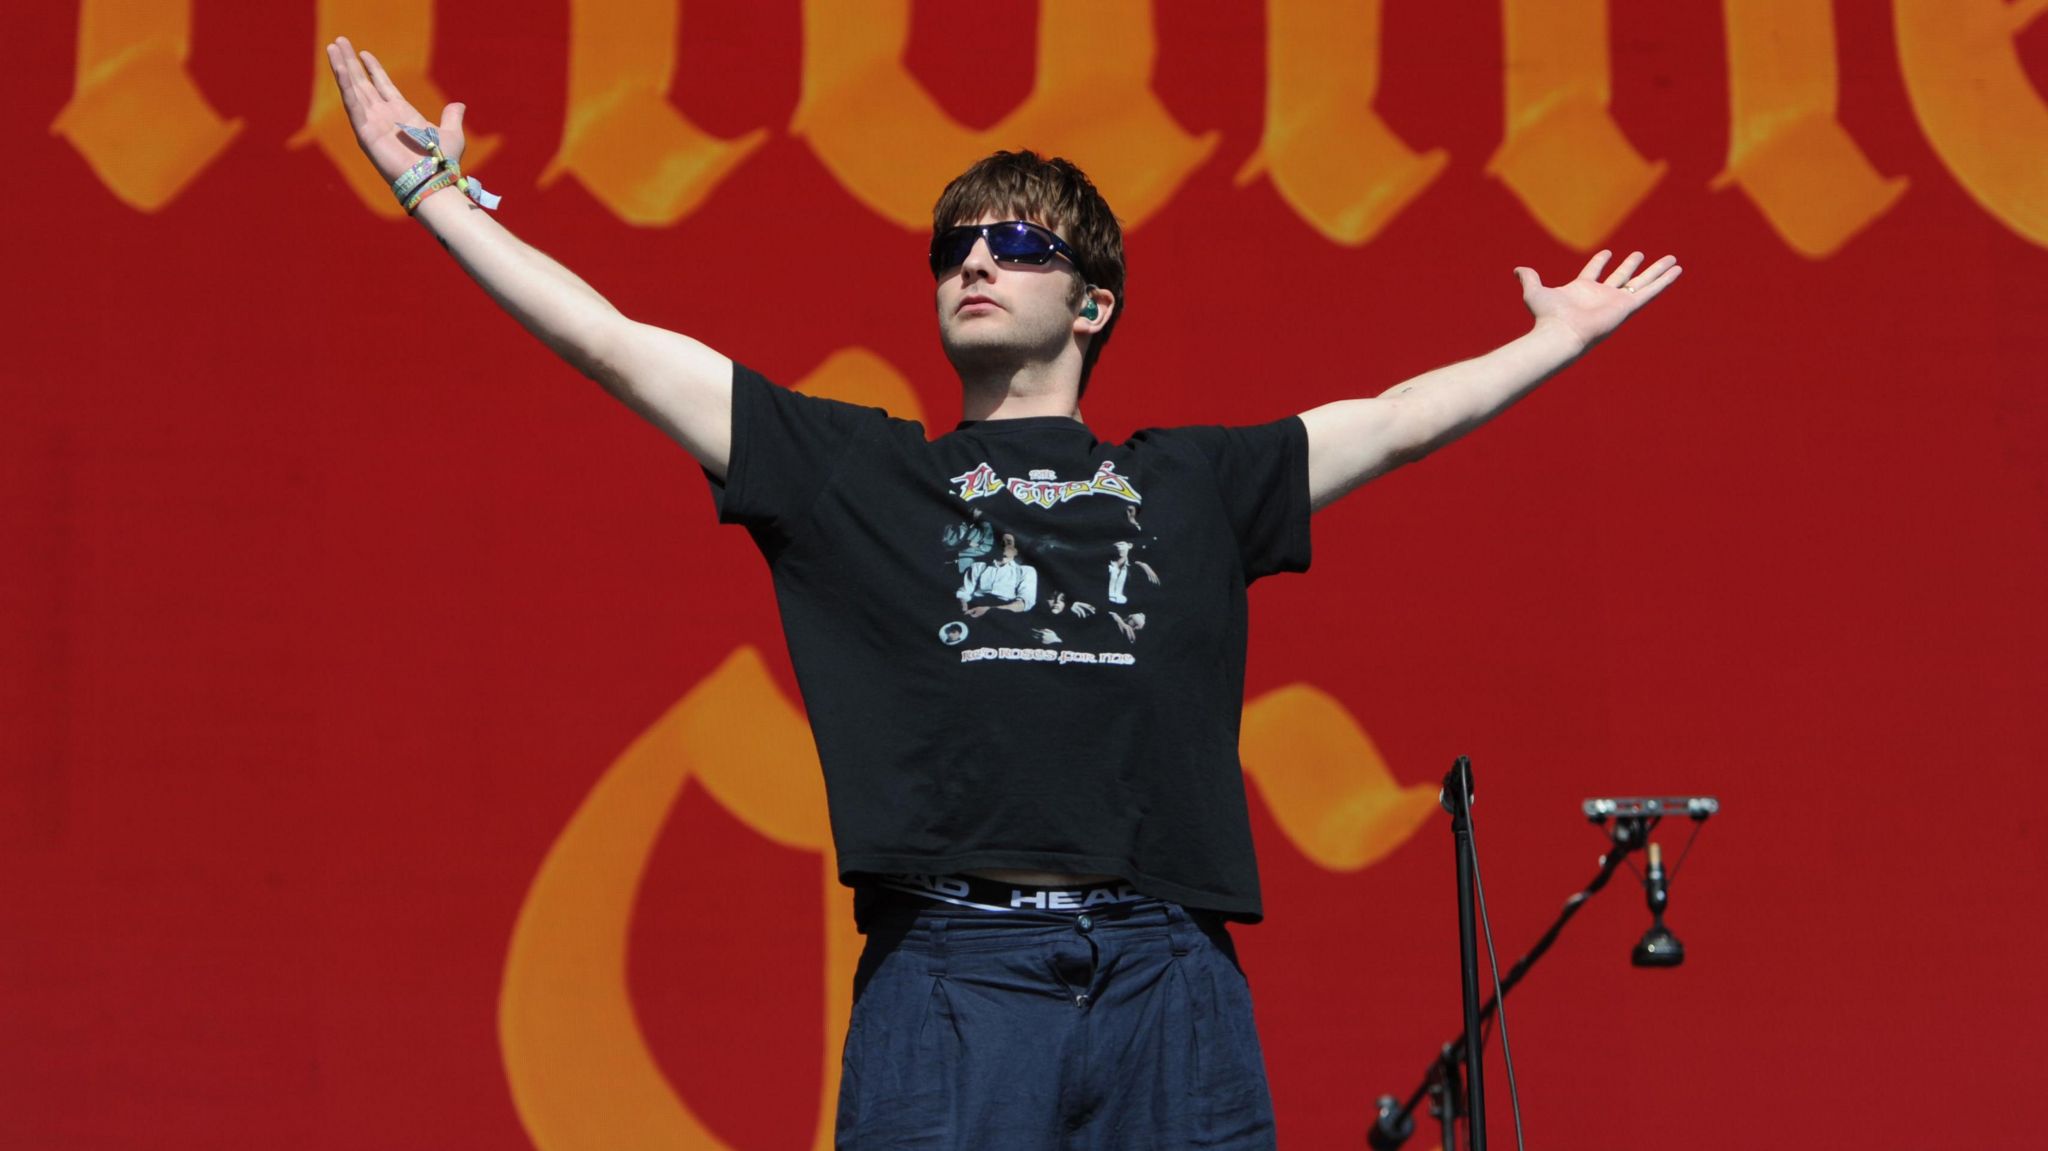 The lead singer of Fontaines D.C., Grian Chatten, pictured performing standing with his arms in the air and sunglasses on.